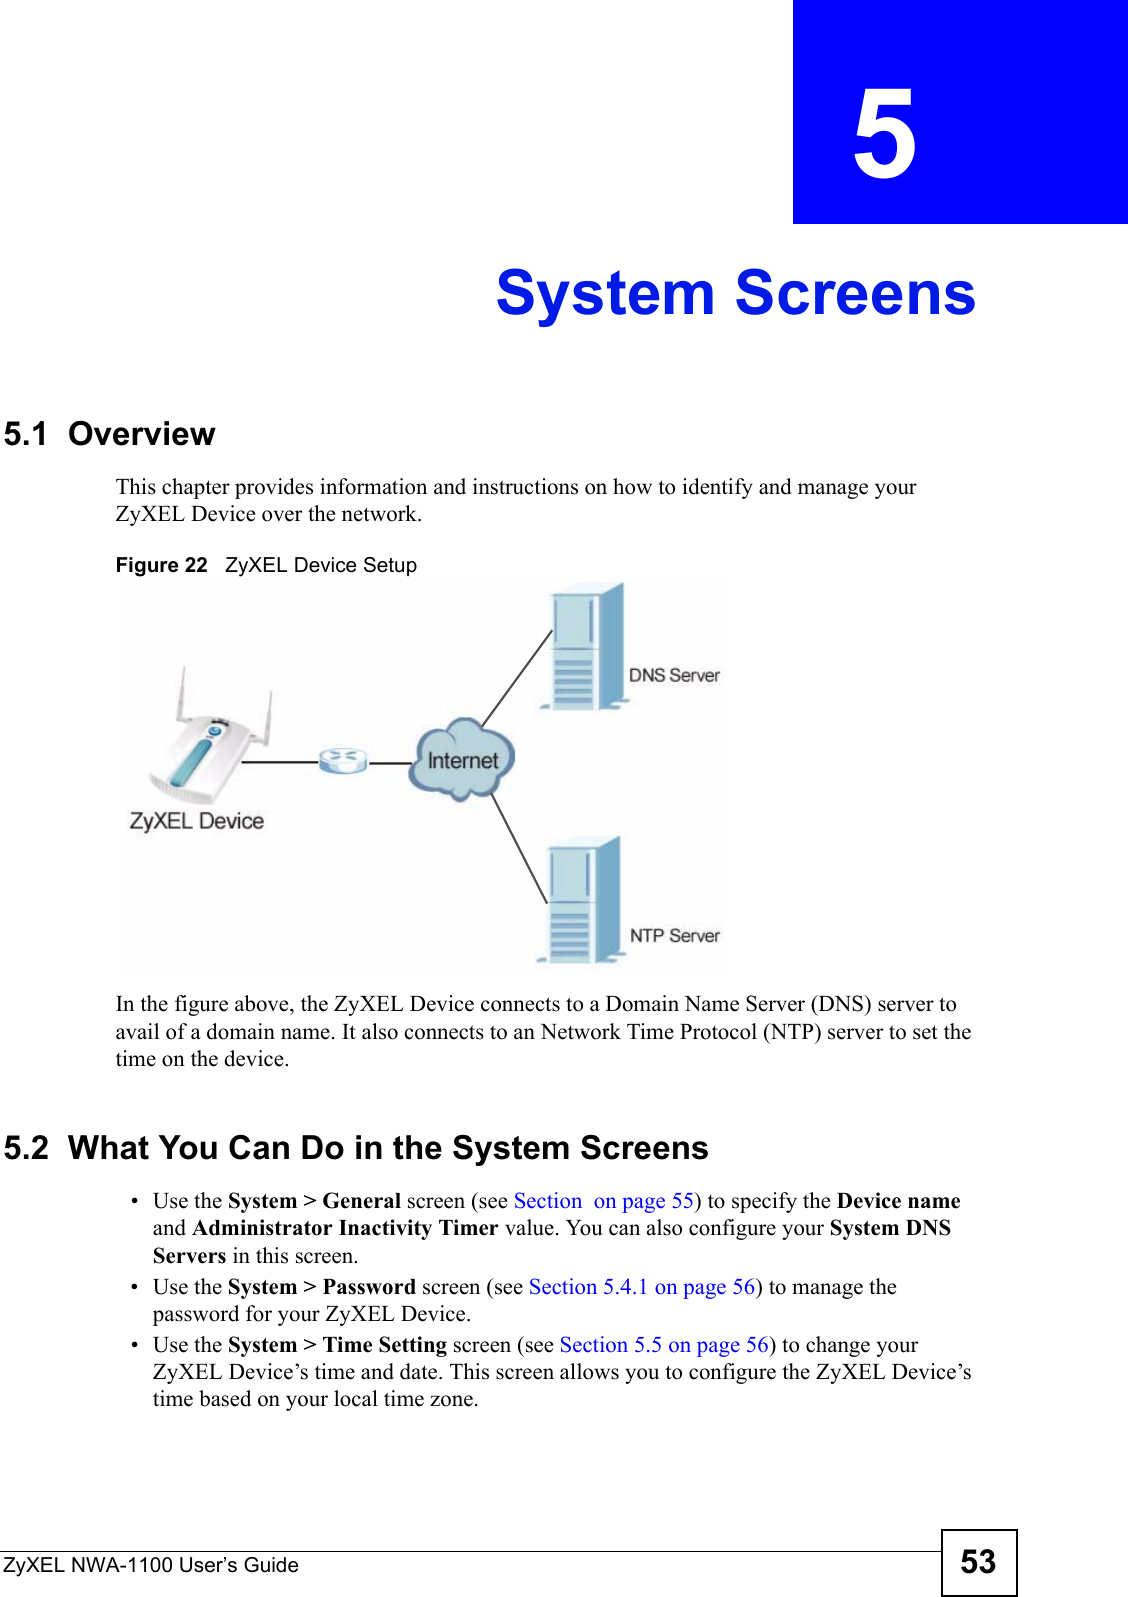 ZyXEL NWA-1100 User’s Guide 53CHAPTER  5 System Screens5.1  OverviewThis chapter provides information and instructions on how to identify and manage your ZyXEL Device over the network. Figure 22   ZyXEL Device Setup In the figure above, the ZyXEL Device connects to a Domain Name Server (DNS) server to avail of a domain name. It also connects to an Network Time Protocol (NTP) server to set the time on the device.5.2  What You Can Do in the System Screens•Use the System &gt; General screen (see Section  on page 55) to specify the Device name and Administrator Inactivity Timer value. You can also configure your System DNS Servers in this screen.•Use the System &gt; Password screen (see Section 5.4.1 on page 56) to manage the password for your ZyXEL Device.•Use the System &gt; Time Setting screen (see Section 5.5 on page 56) to change your ZyXEL Device’s time and date. This screen allows you to configure the ZyXEL Device’s time based on your local time zone.